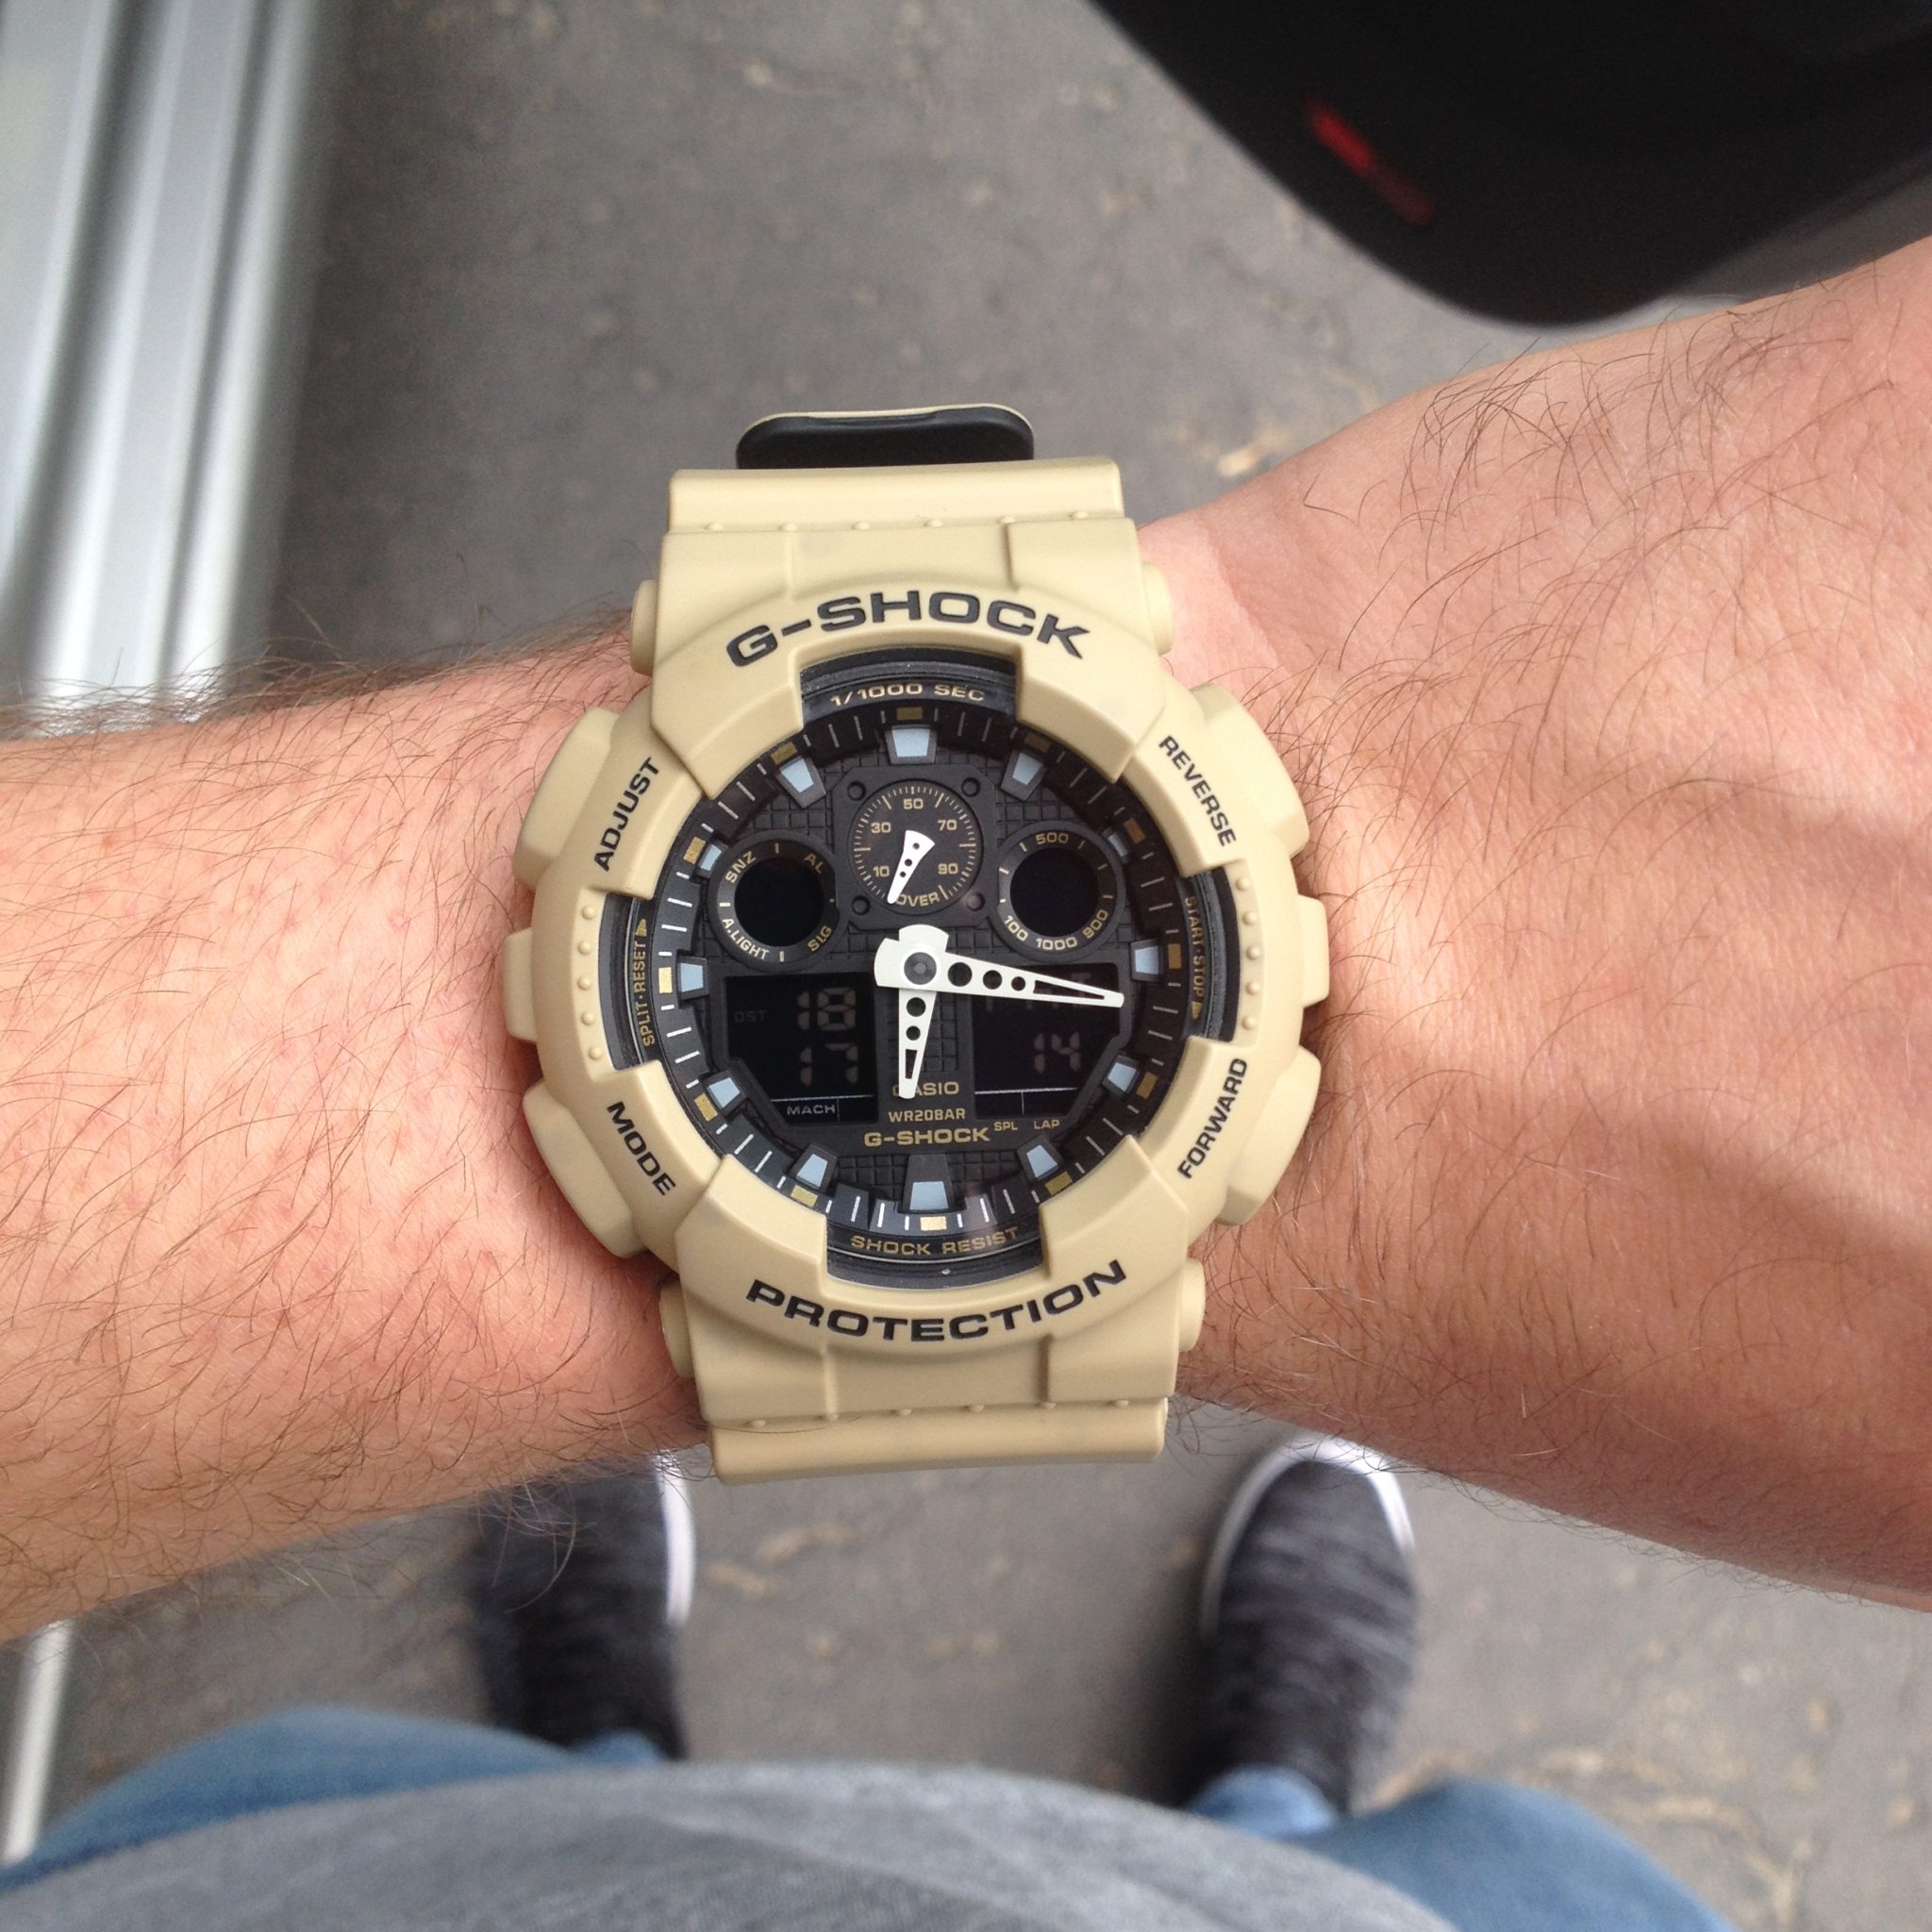 Anden klasse Evne hold Owner Review: Casio G-Shock GA-100 – A lovely beast - FIFTH WRIST